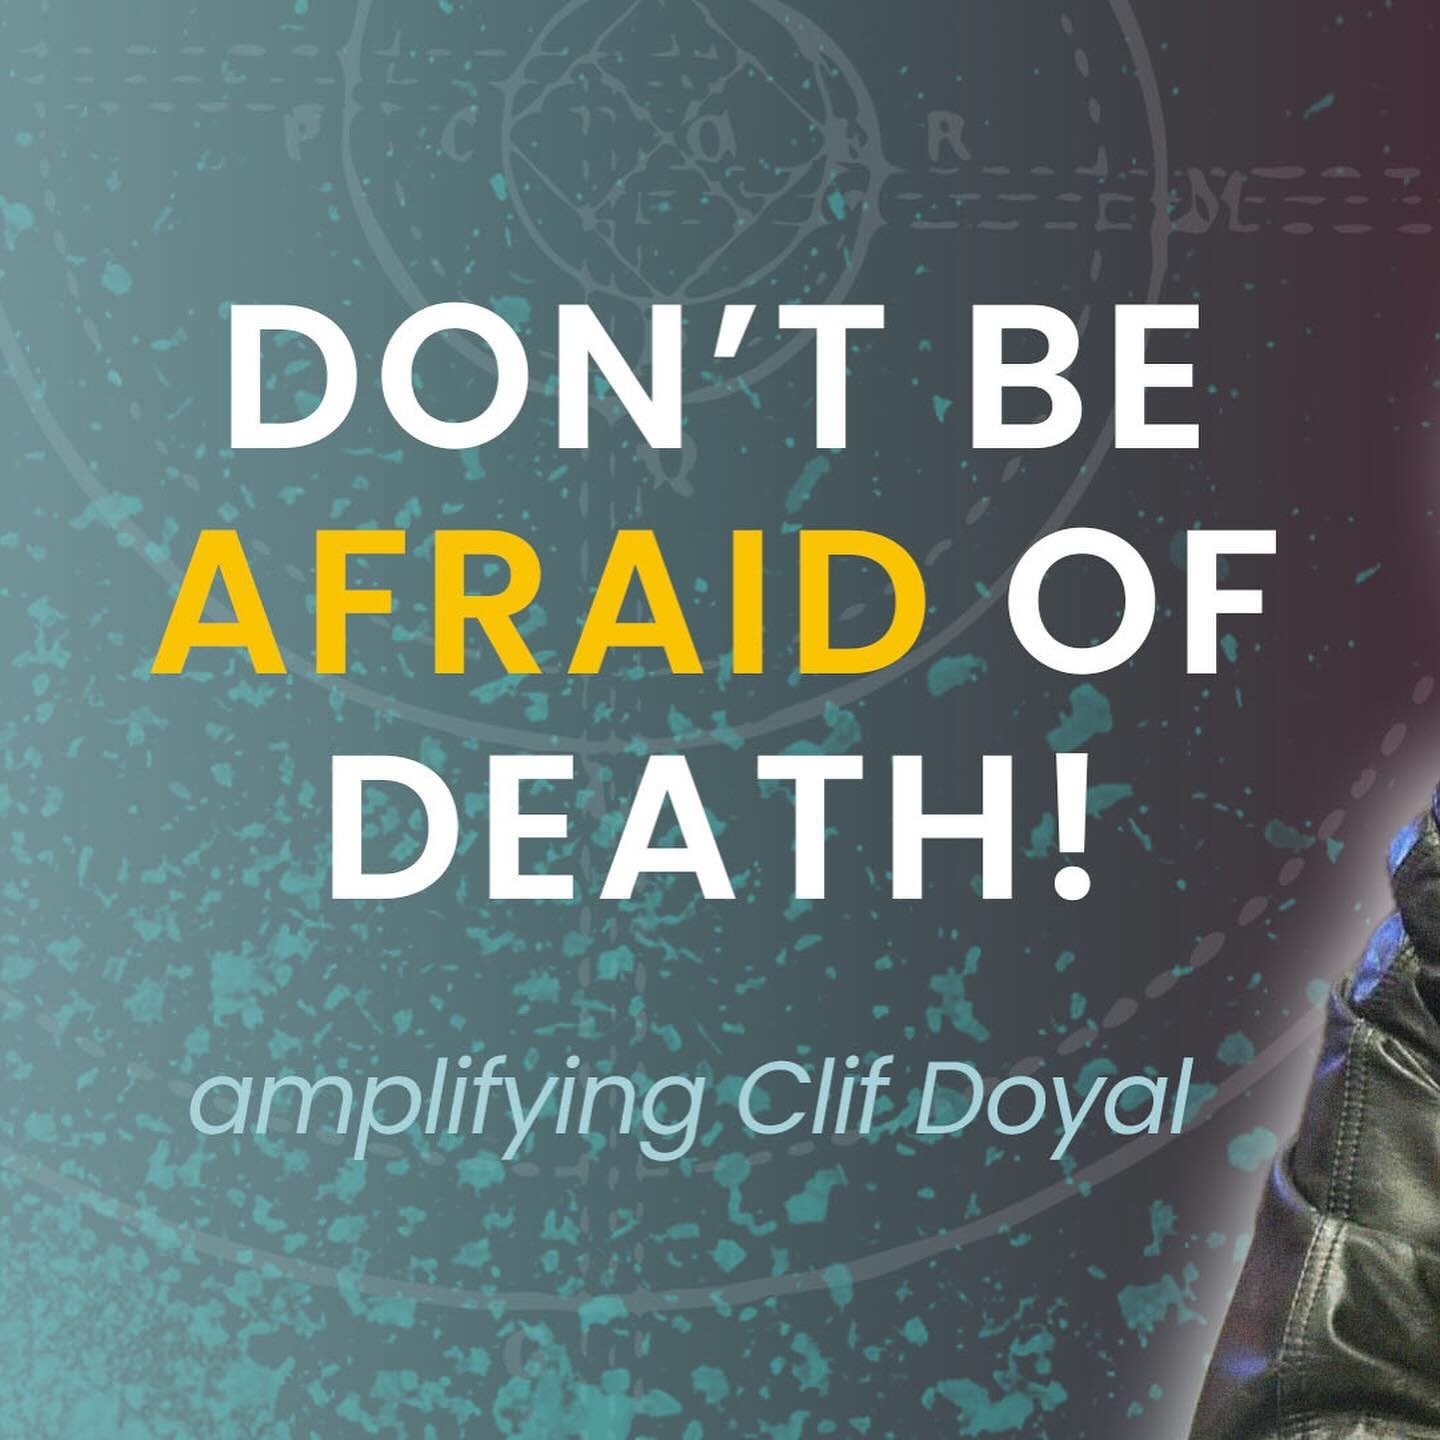 NEW! TRUE Stories of Ghosts, Demons, and Ancestor Spirits from Nashville Music Industry Vet, Clif Doyal. 

🎧👀 Listen to episode 107 where you get your podcasts and watch on YT! 

#humanamplified #paranormalactivity #ghoststories #spirits #Afterlife